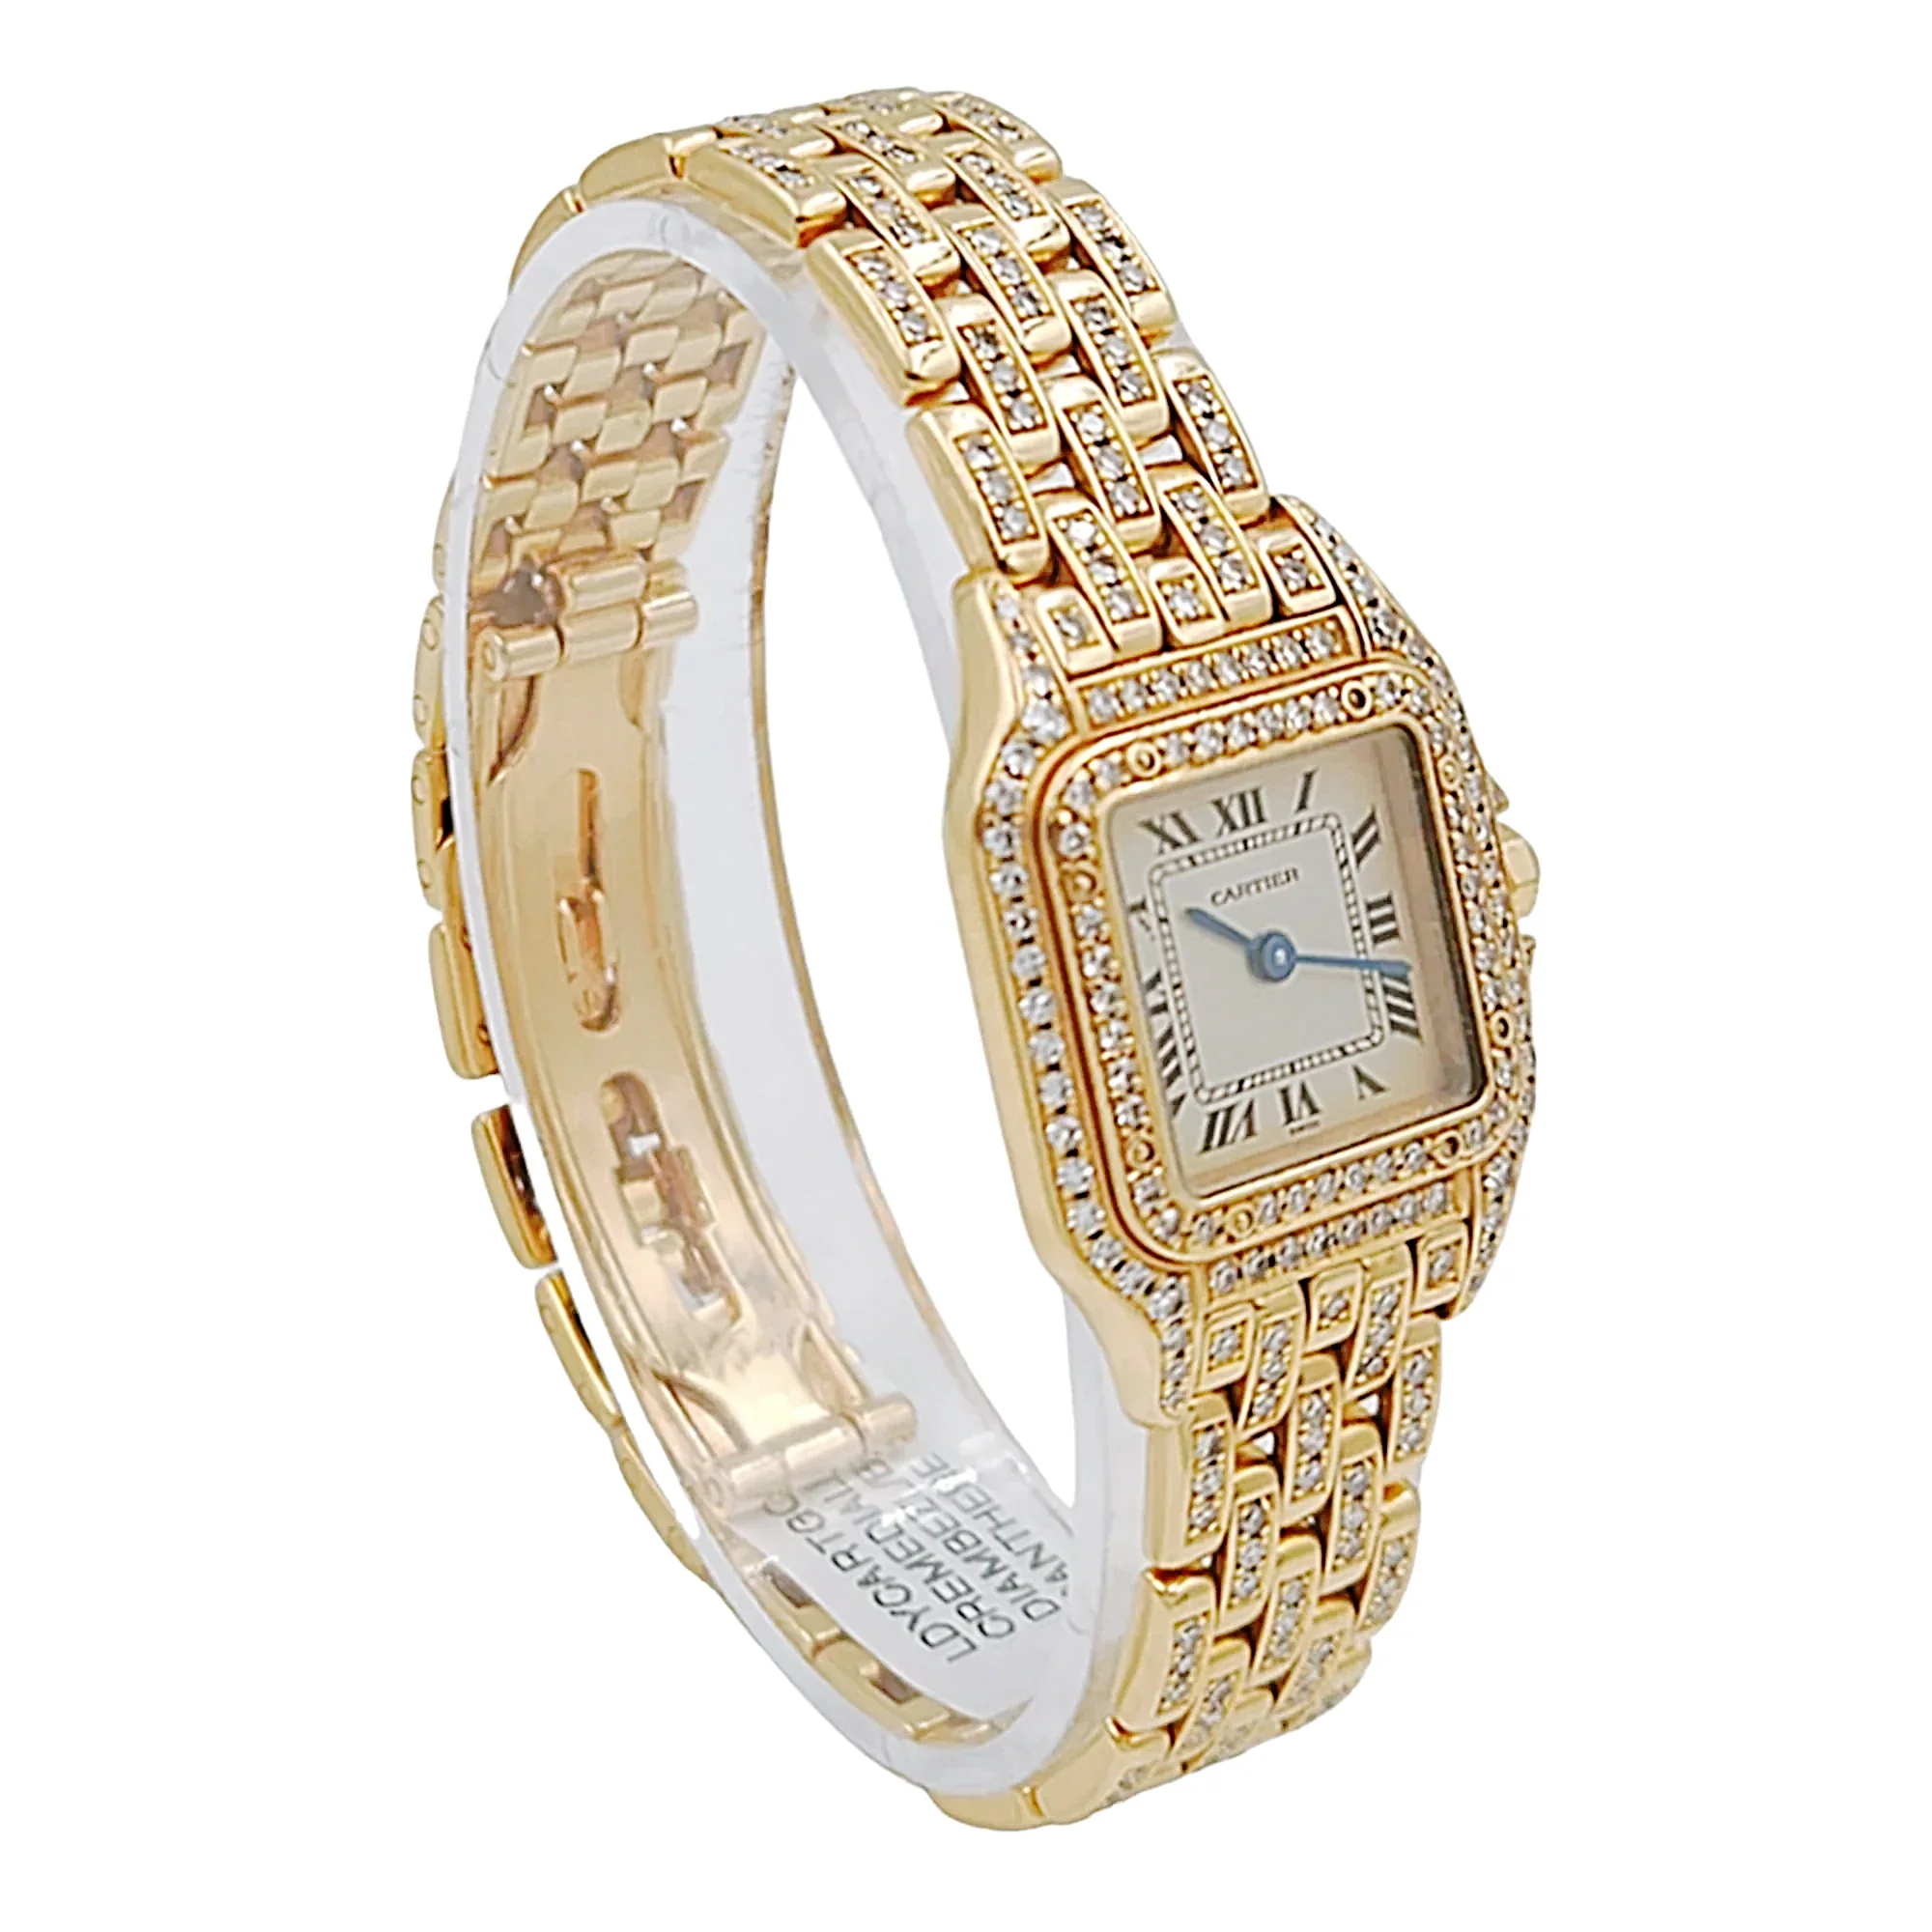 Ladies Small Cartier Panthere 18K Solid Yellow Gold Watch with Diamond Bracelet and Bezel. (Pre-Owned)